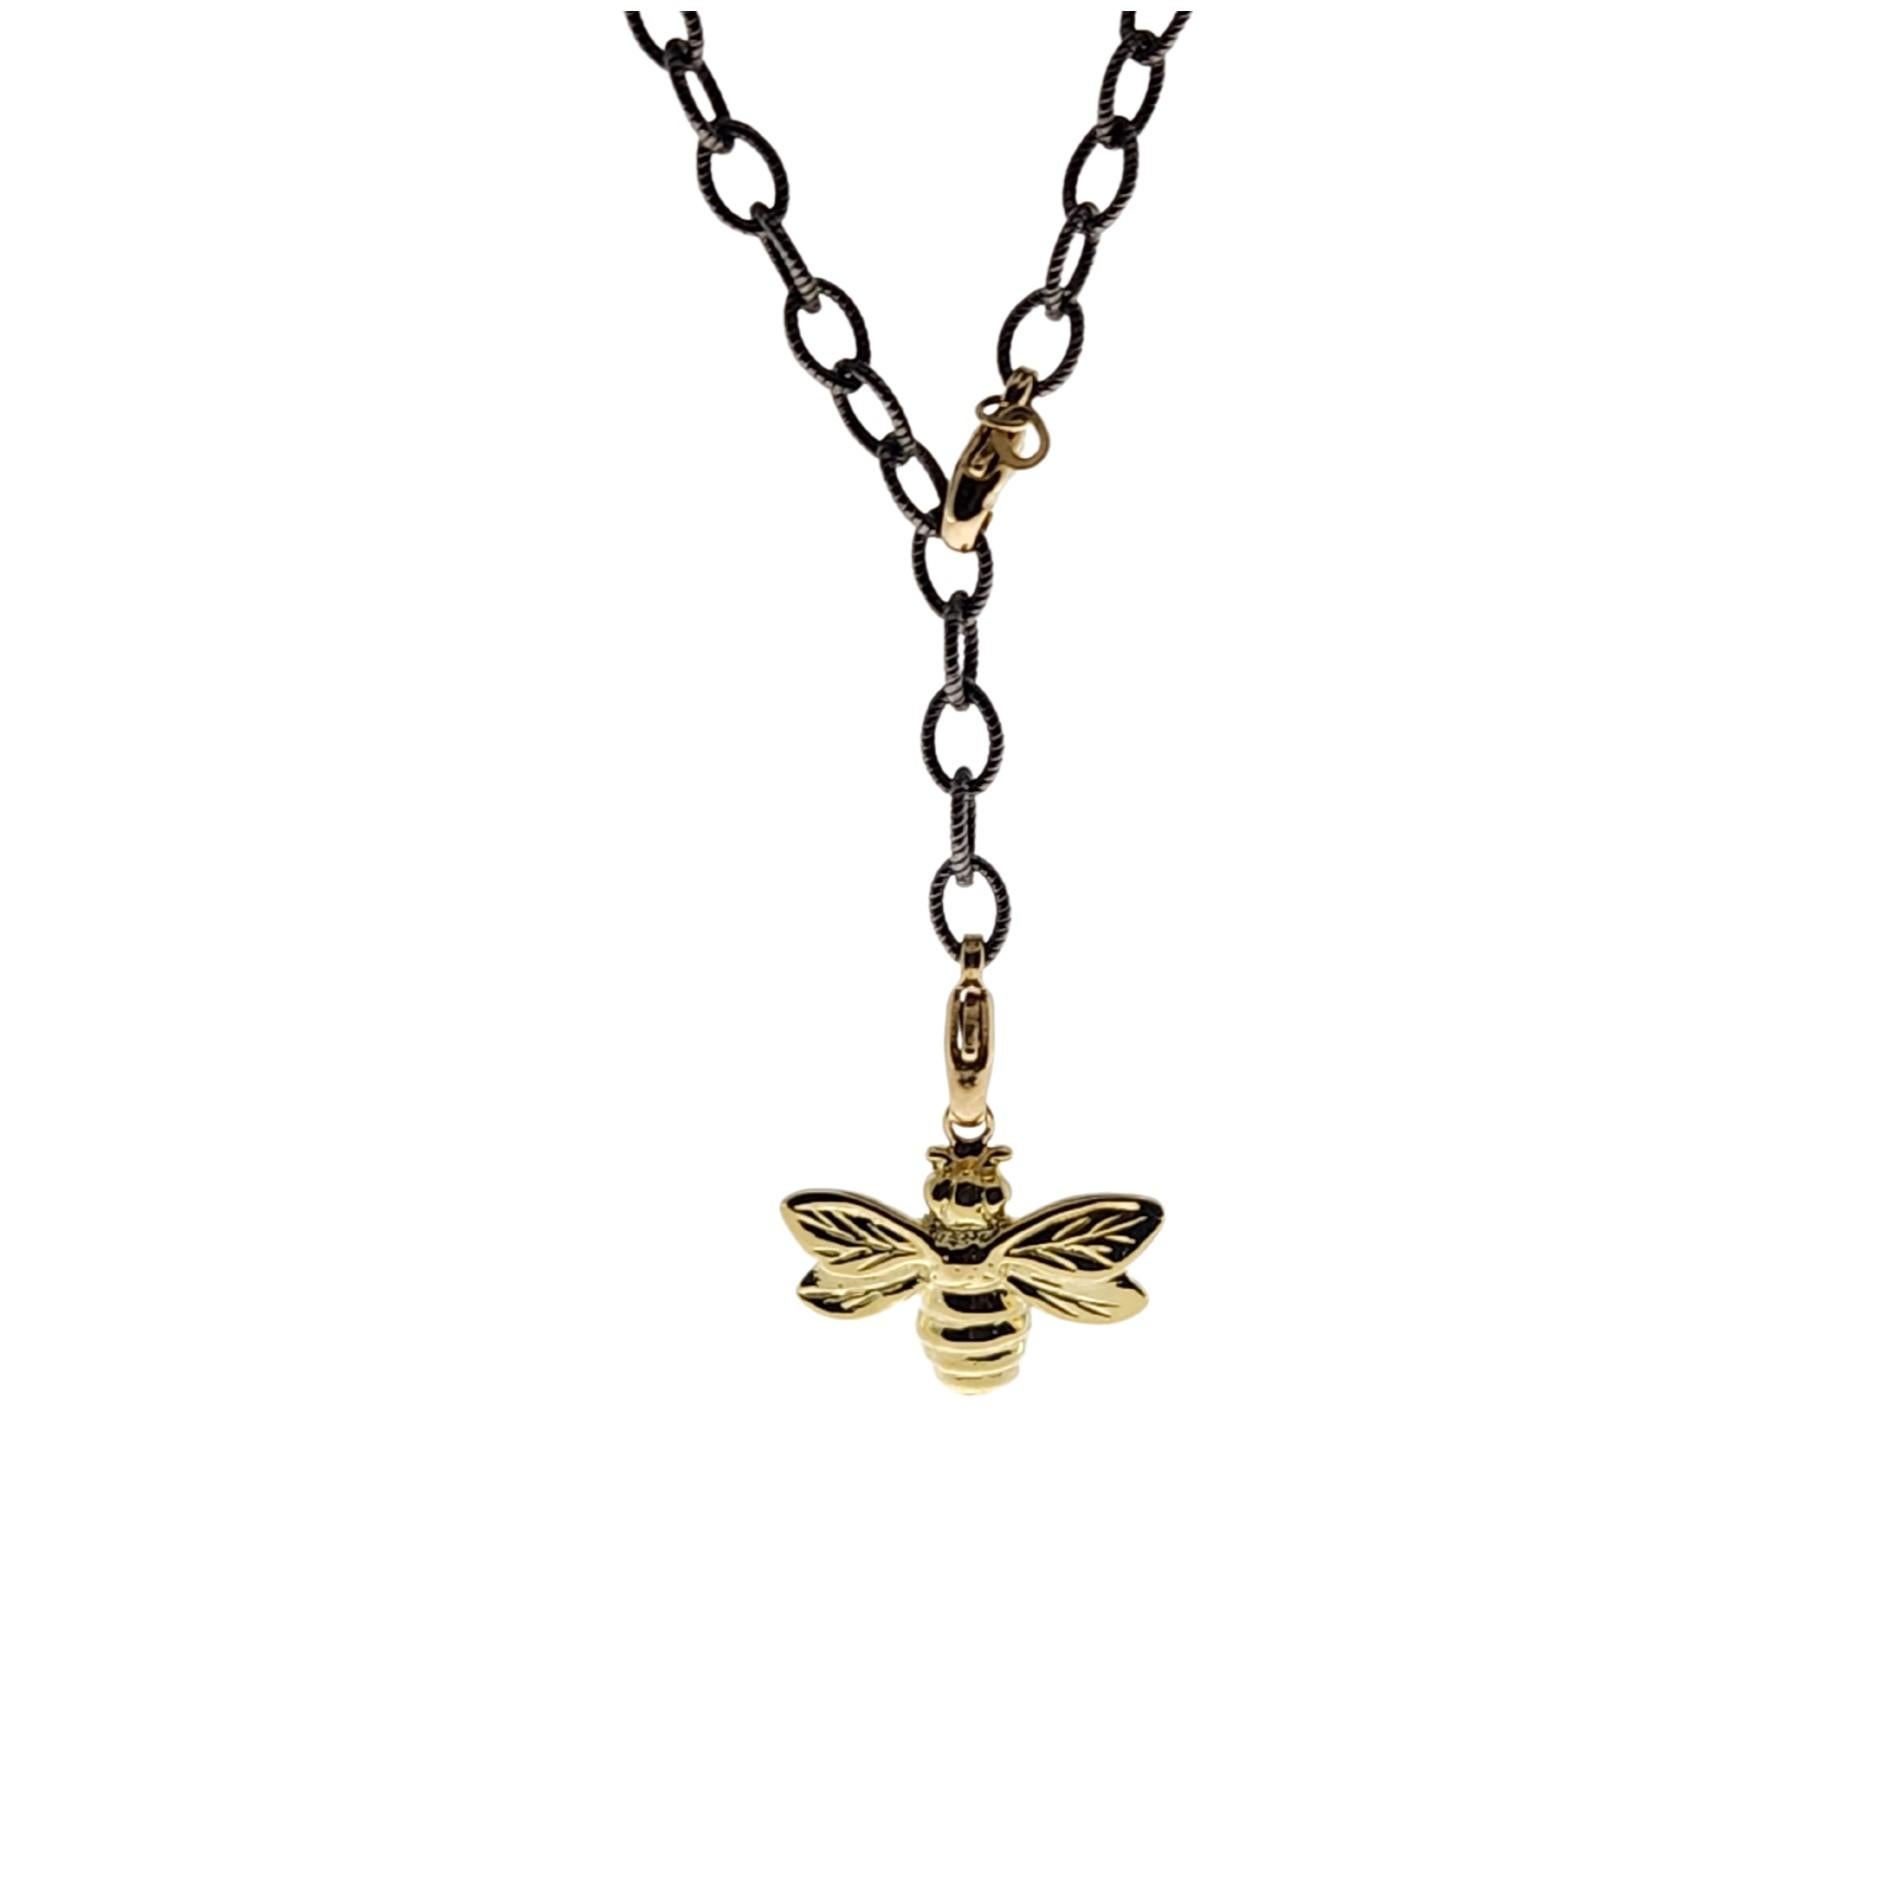 Women's or Men's Busy Bee Lariat Necklace in 18K Gold on an Oxidized Silver Chain with Lobsters For Sale